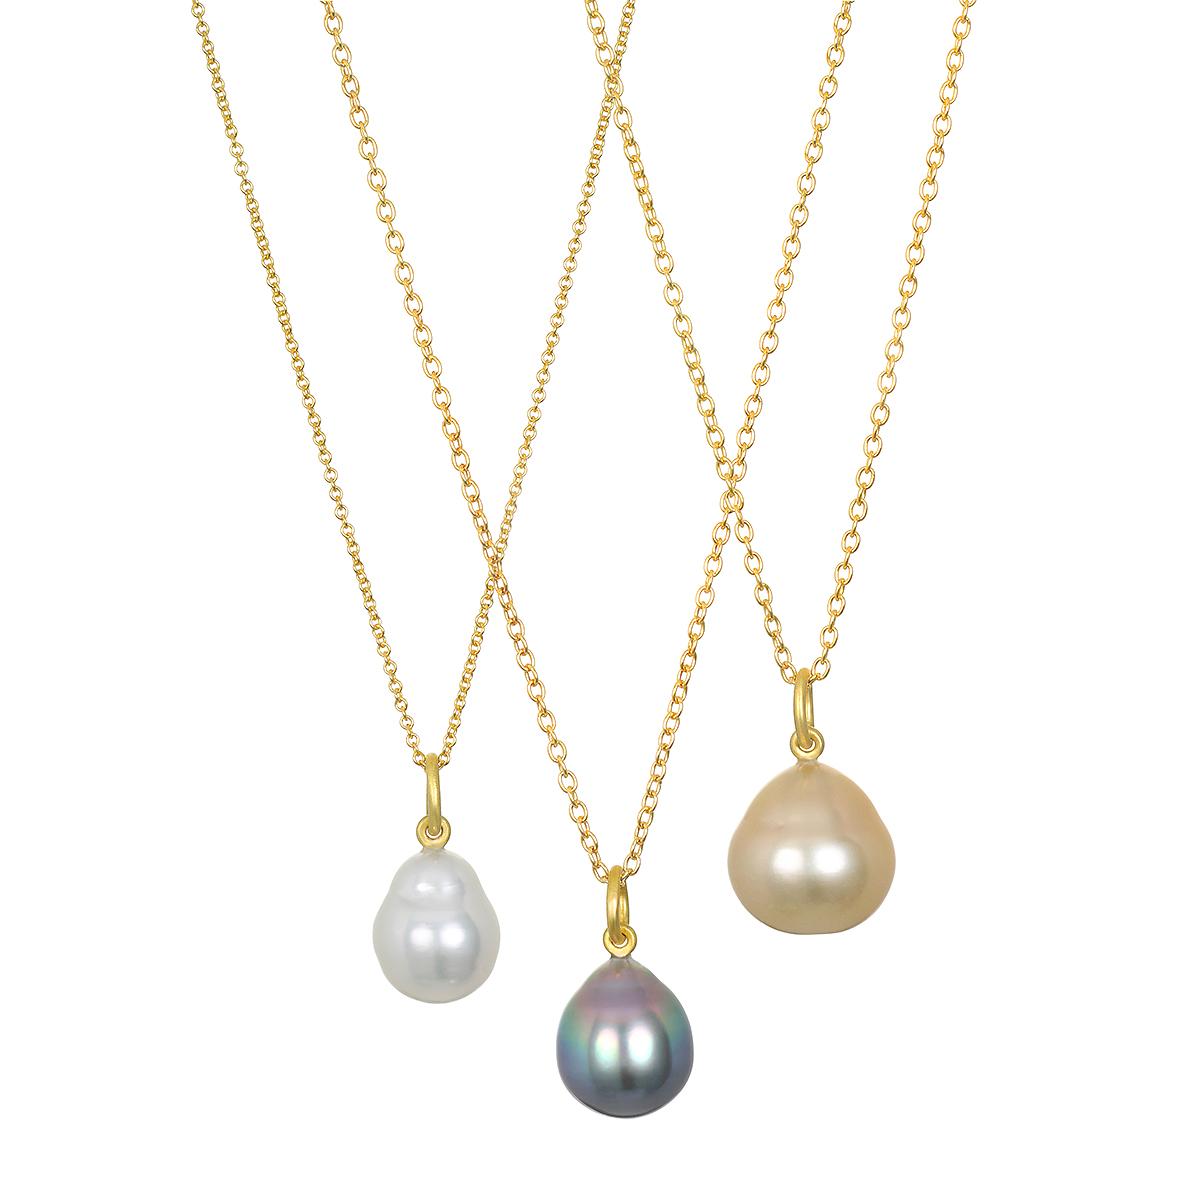 This beautiful Faye Kim Golden South Sea Pearl Pendant, dropped onto an 18 Karat Gold chain with a classic jump ring bail, is both lustrous and classic. The pendant's modern design conveys understated elegance and a truly stylish, everyday look and